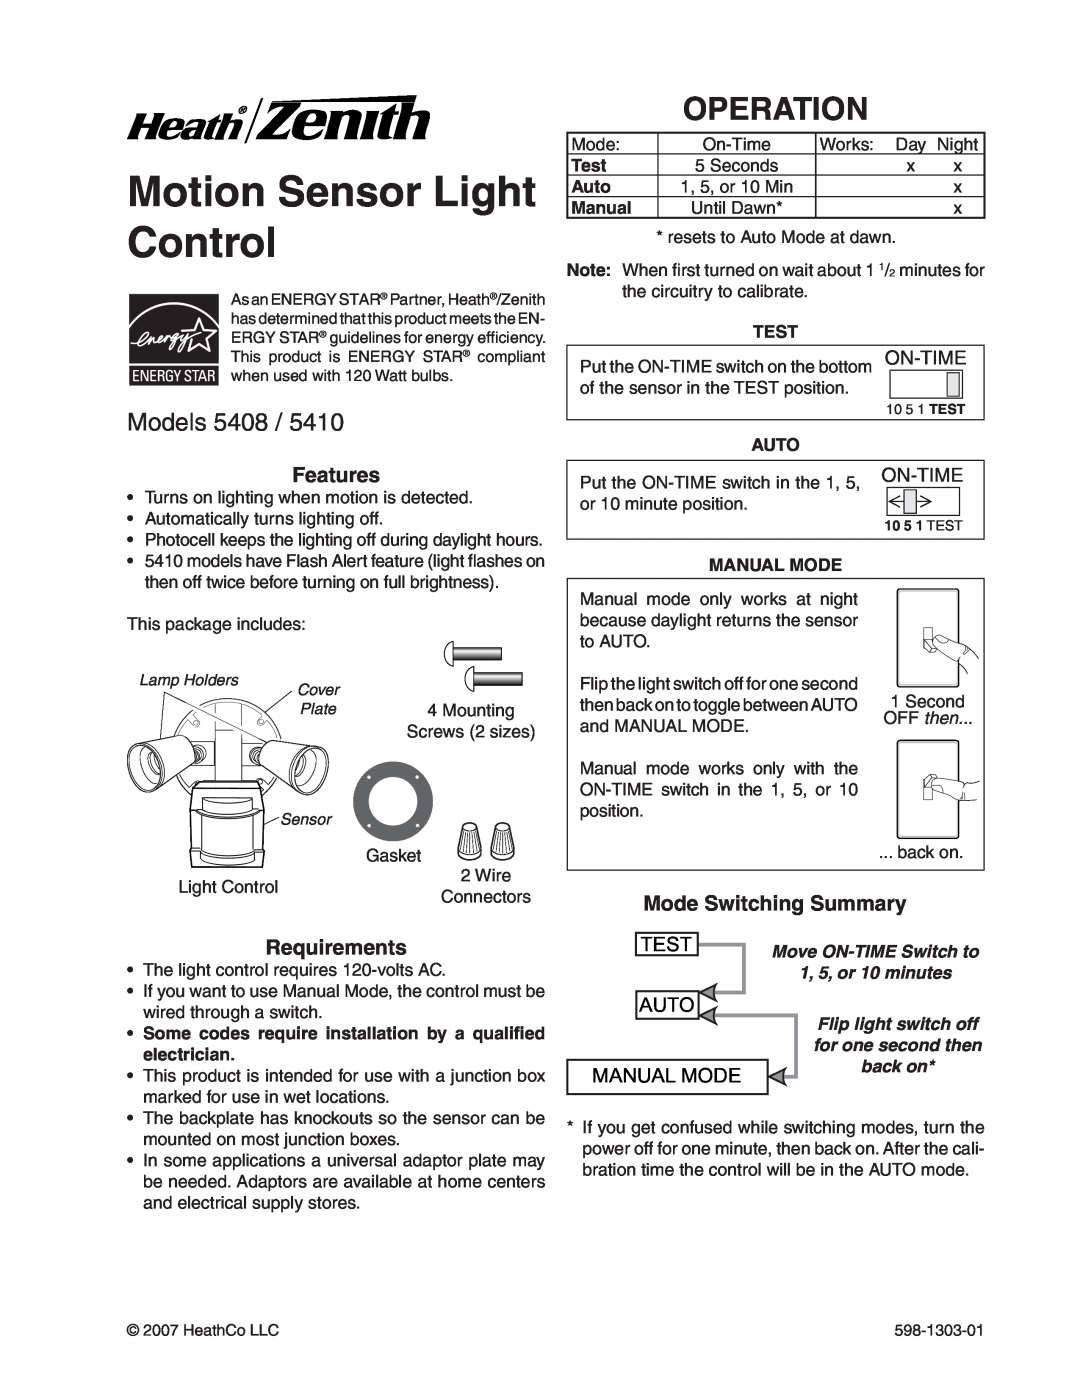 Heath Zenith 5408 / 5410 manual Motion Sensor Light Control, Operation, Models, Mode Switching Summary, On-Time, Test 